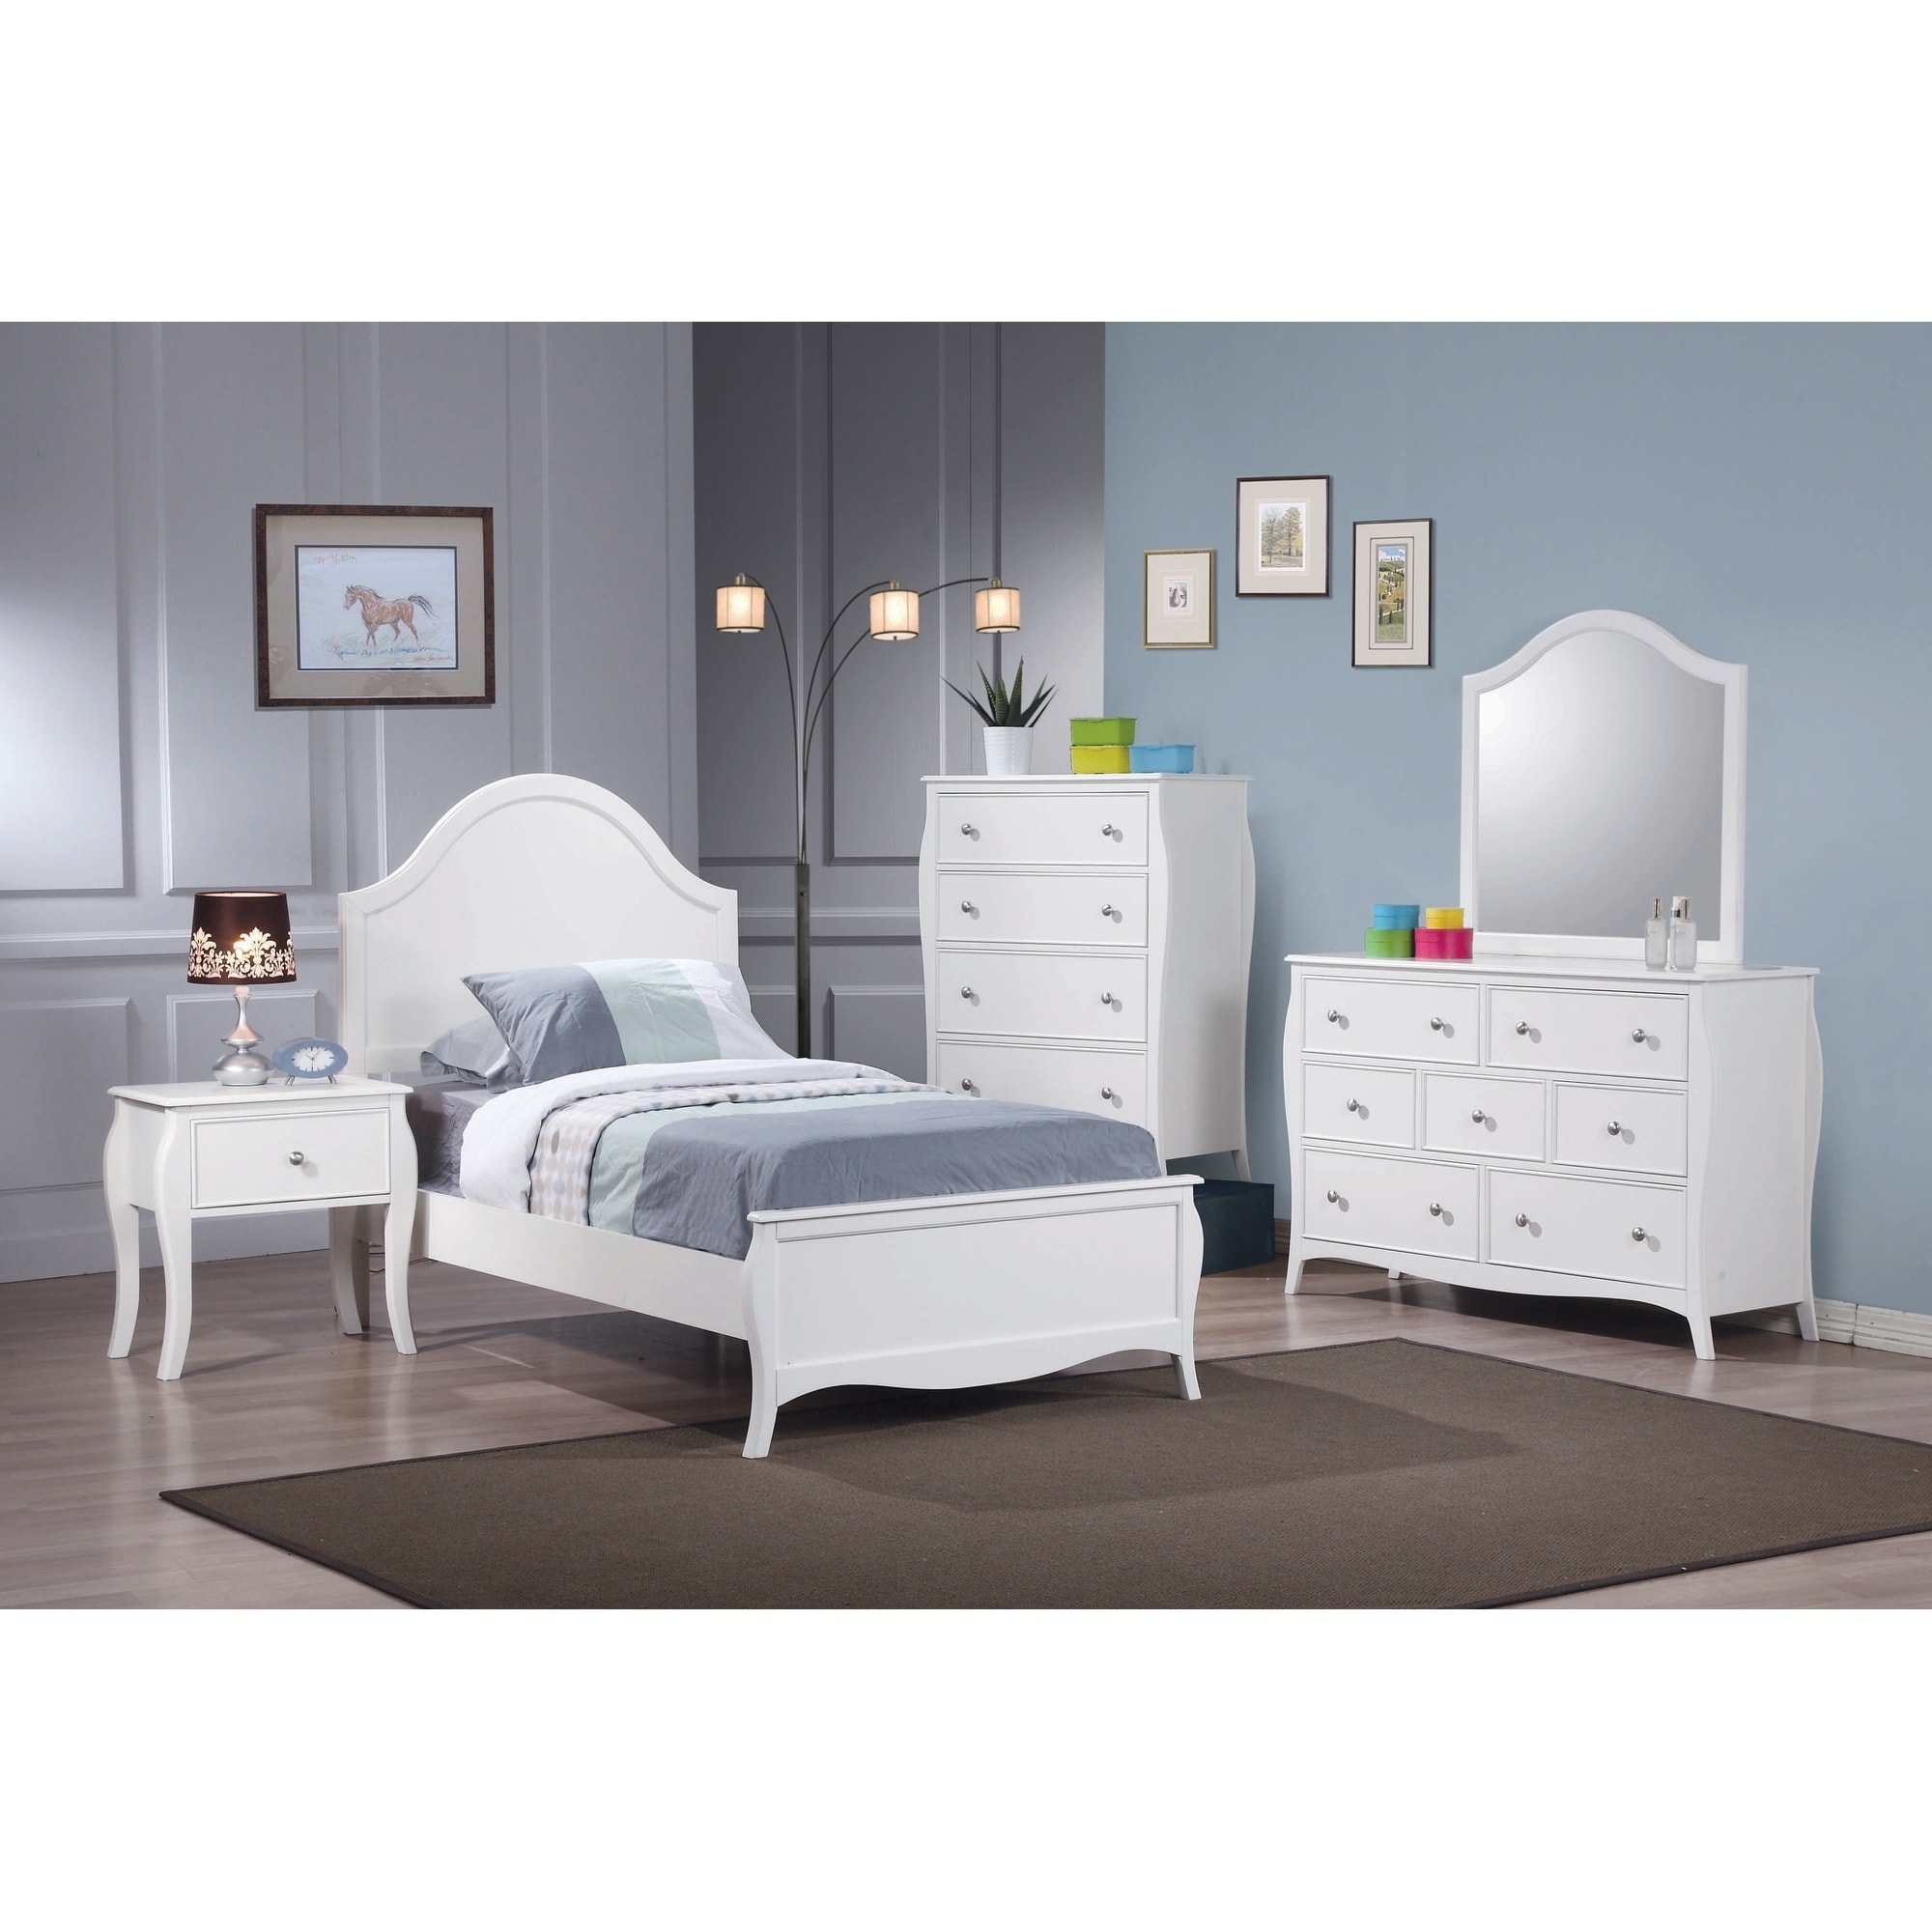 Copper Grove Binbrook French Country White 5 Piece Bedroom Set